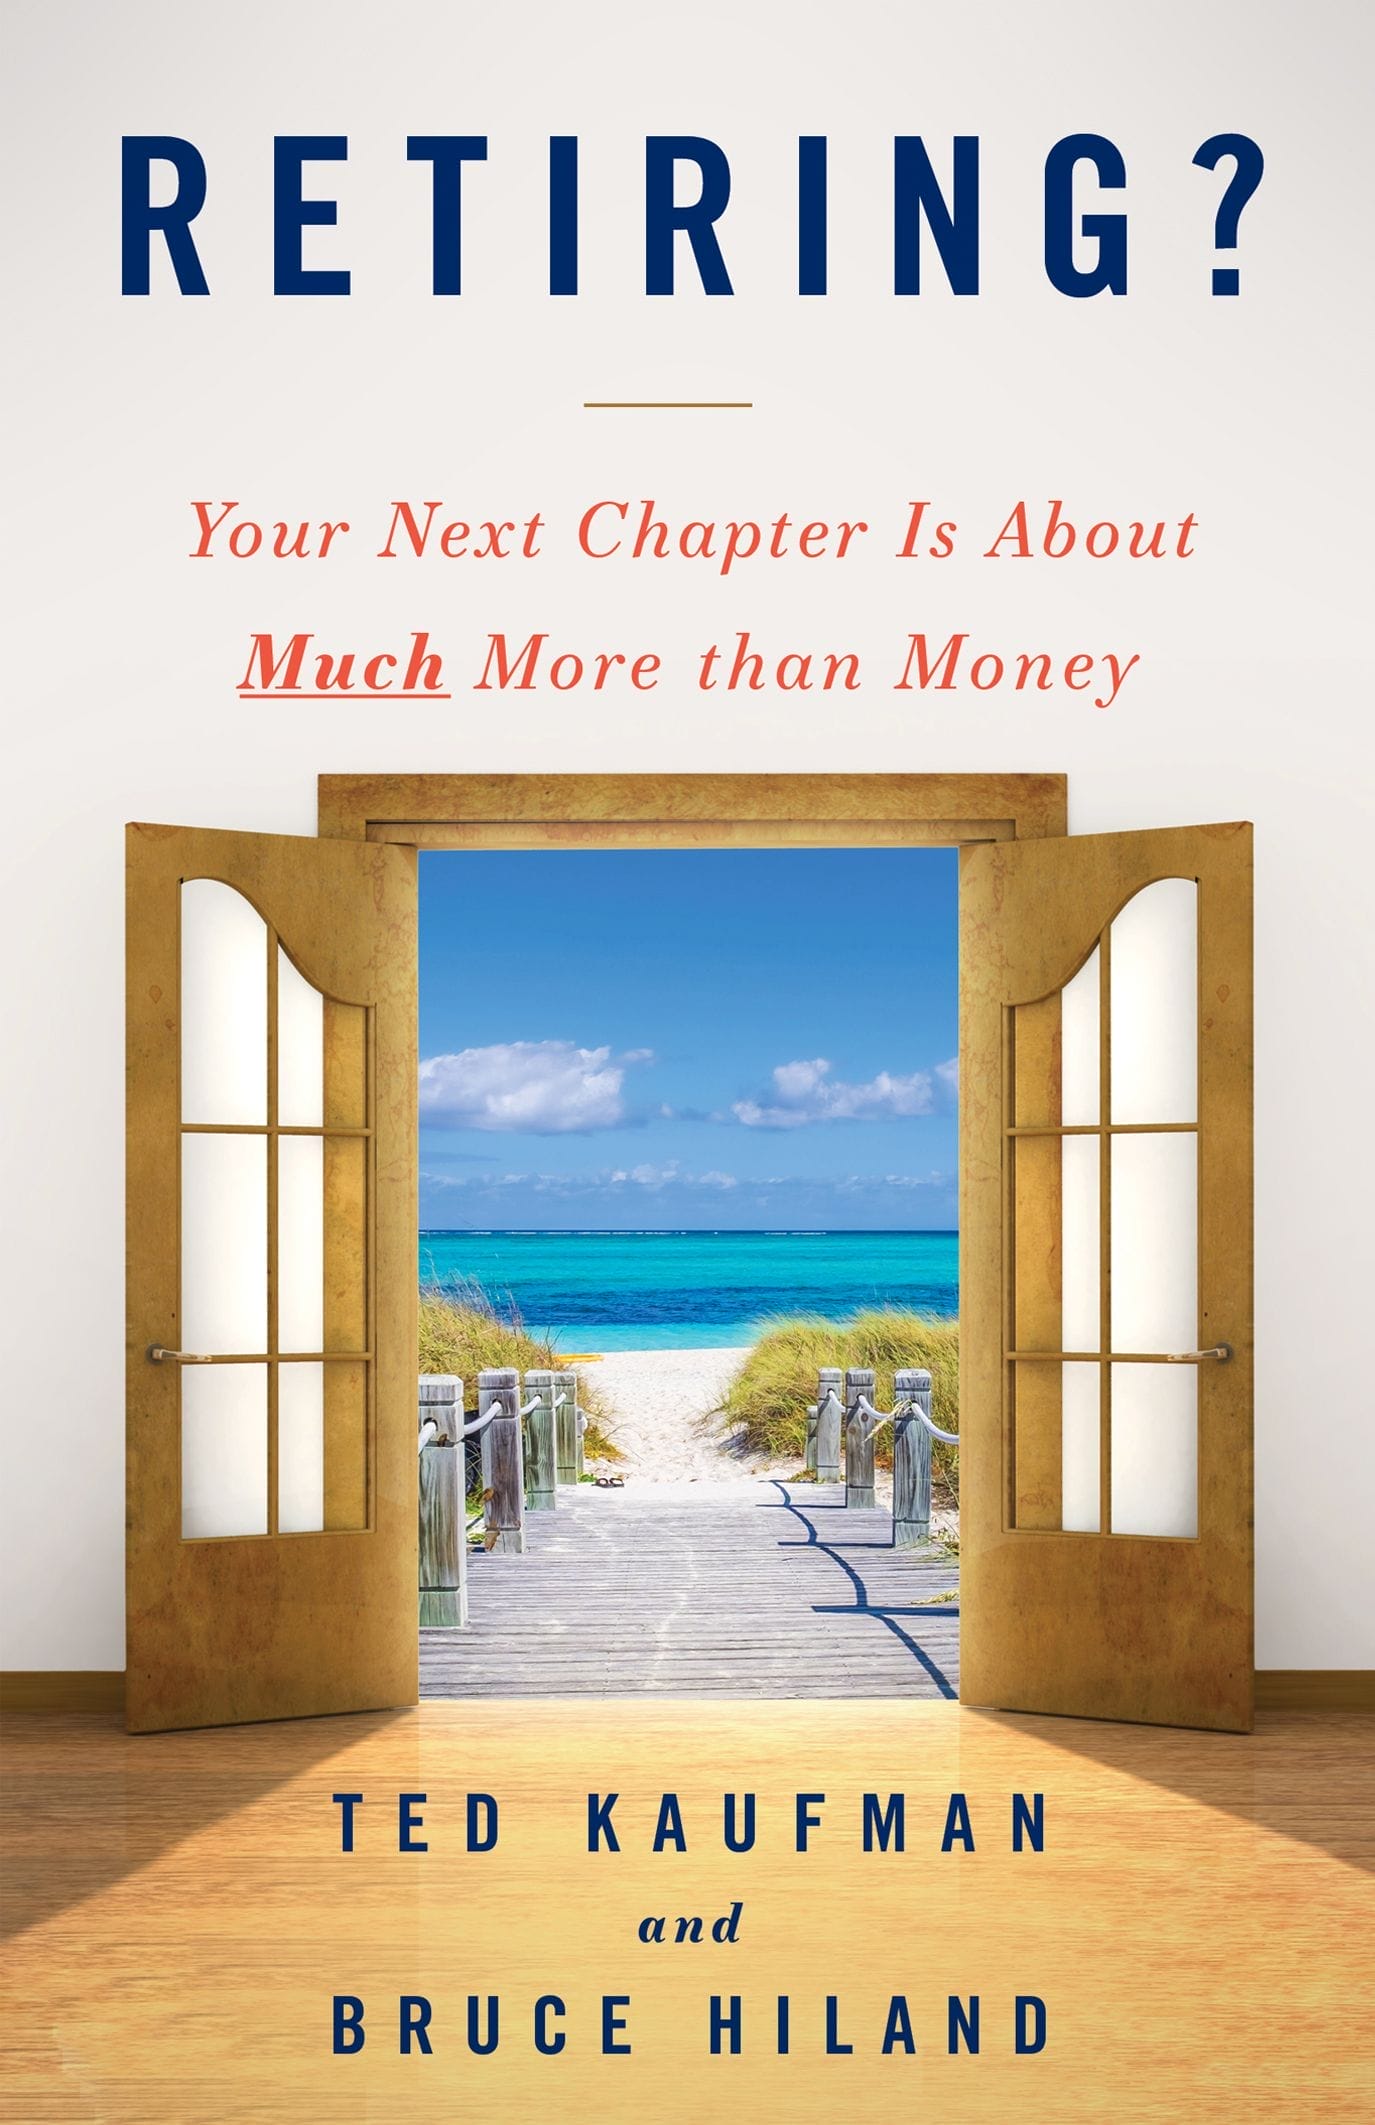 Book titled "Retiring? Your Next Chapter Is About Much More Than Money